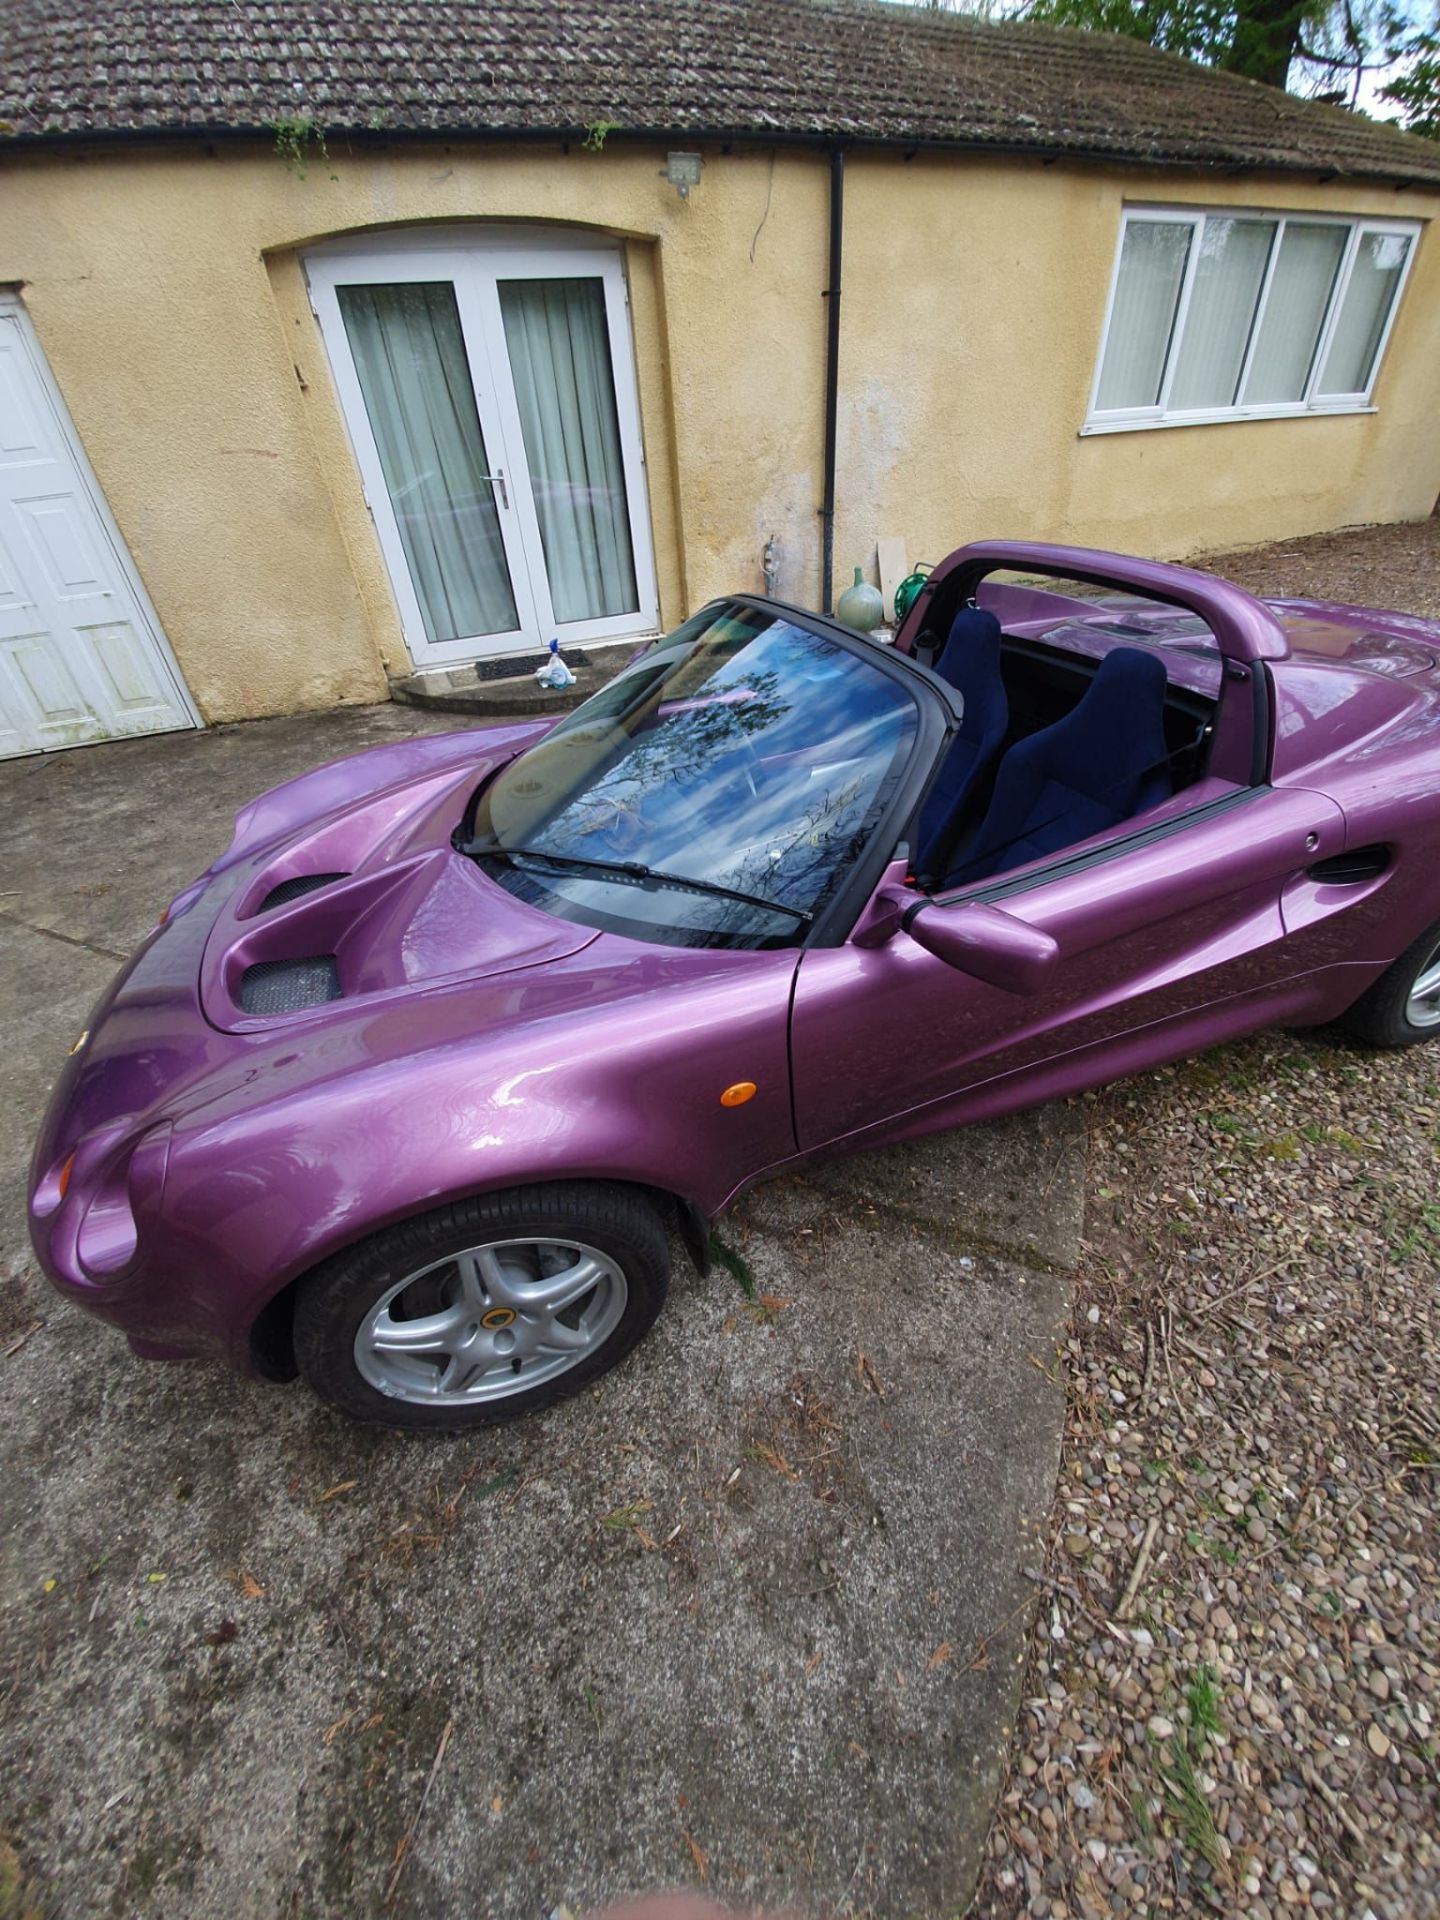 1998 Lotus Elise with mileage of 6,802 in one-off factory painted colour - Image 4 of 8